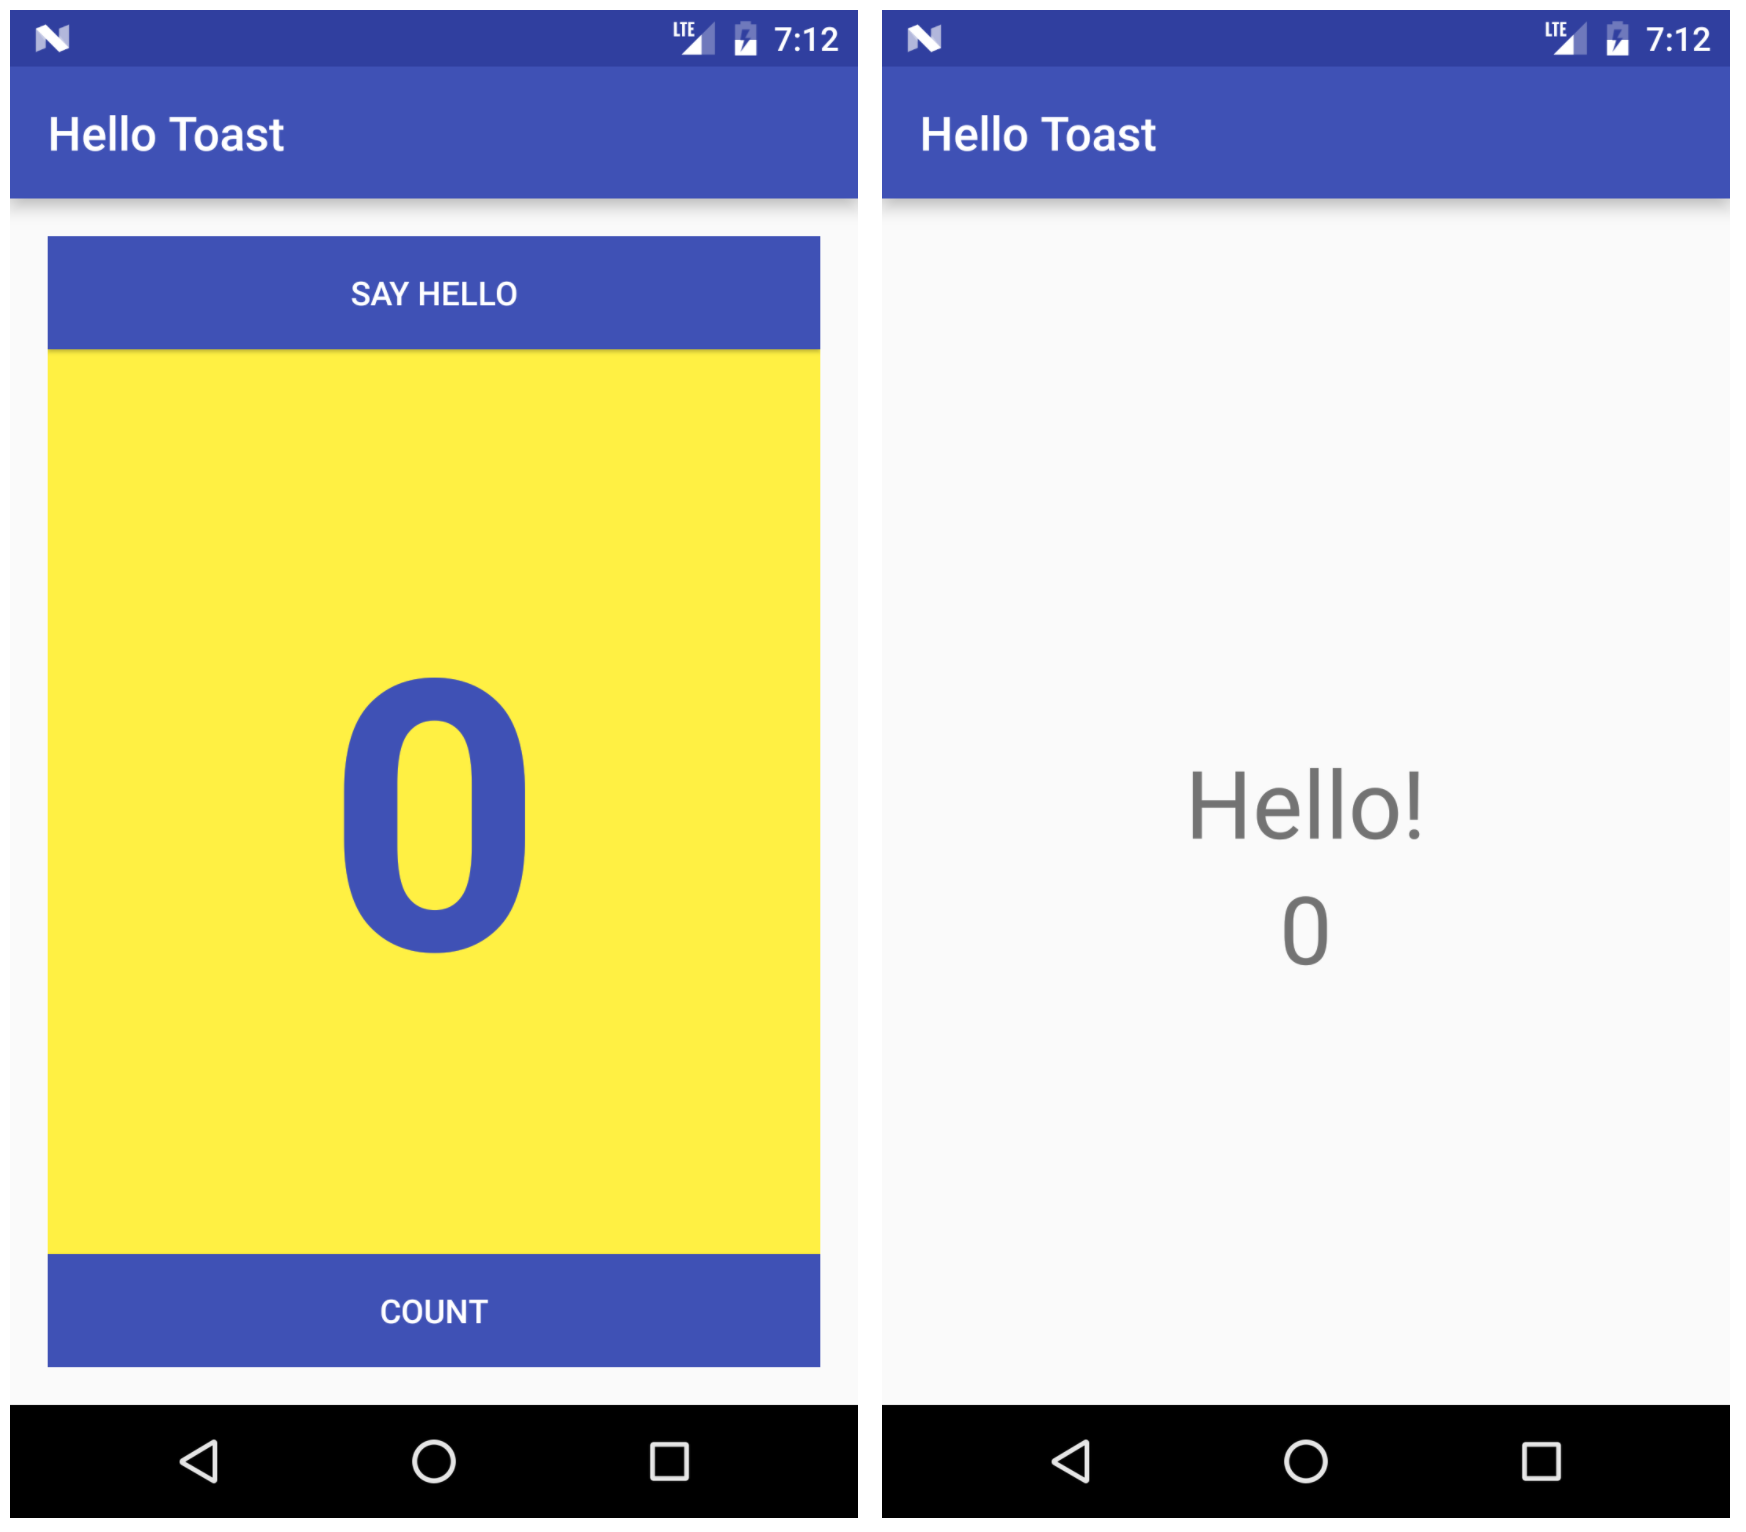 Updated HelloToast app (main activity and second activity)